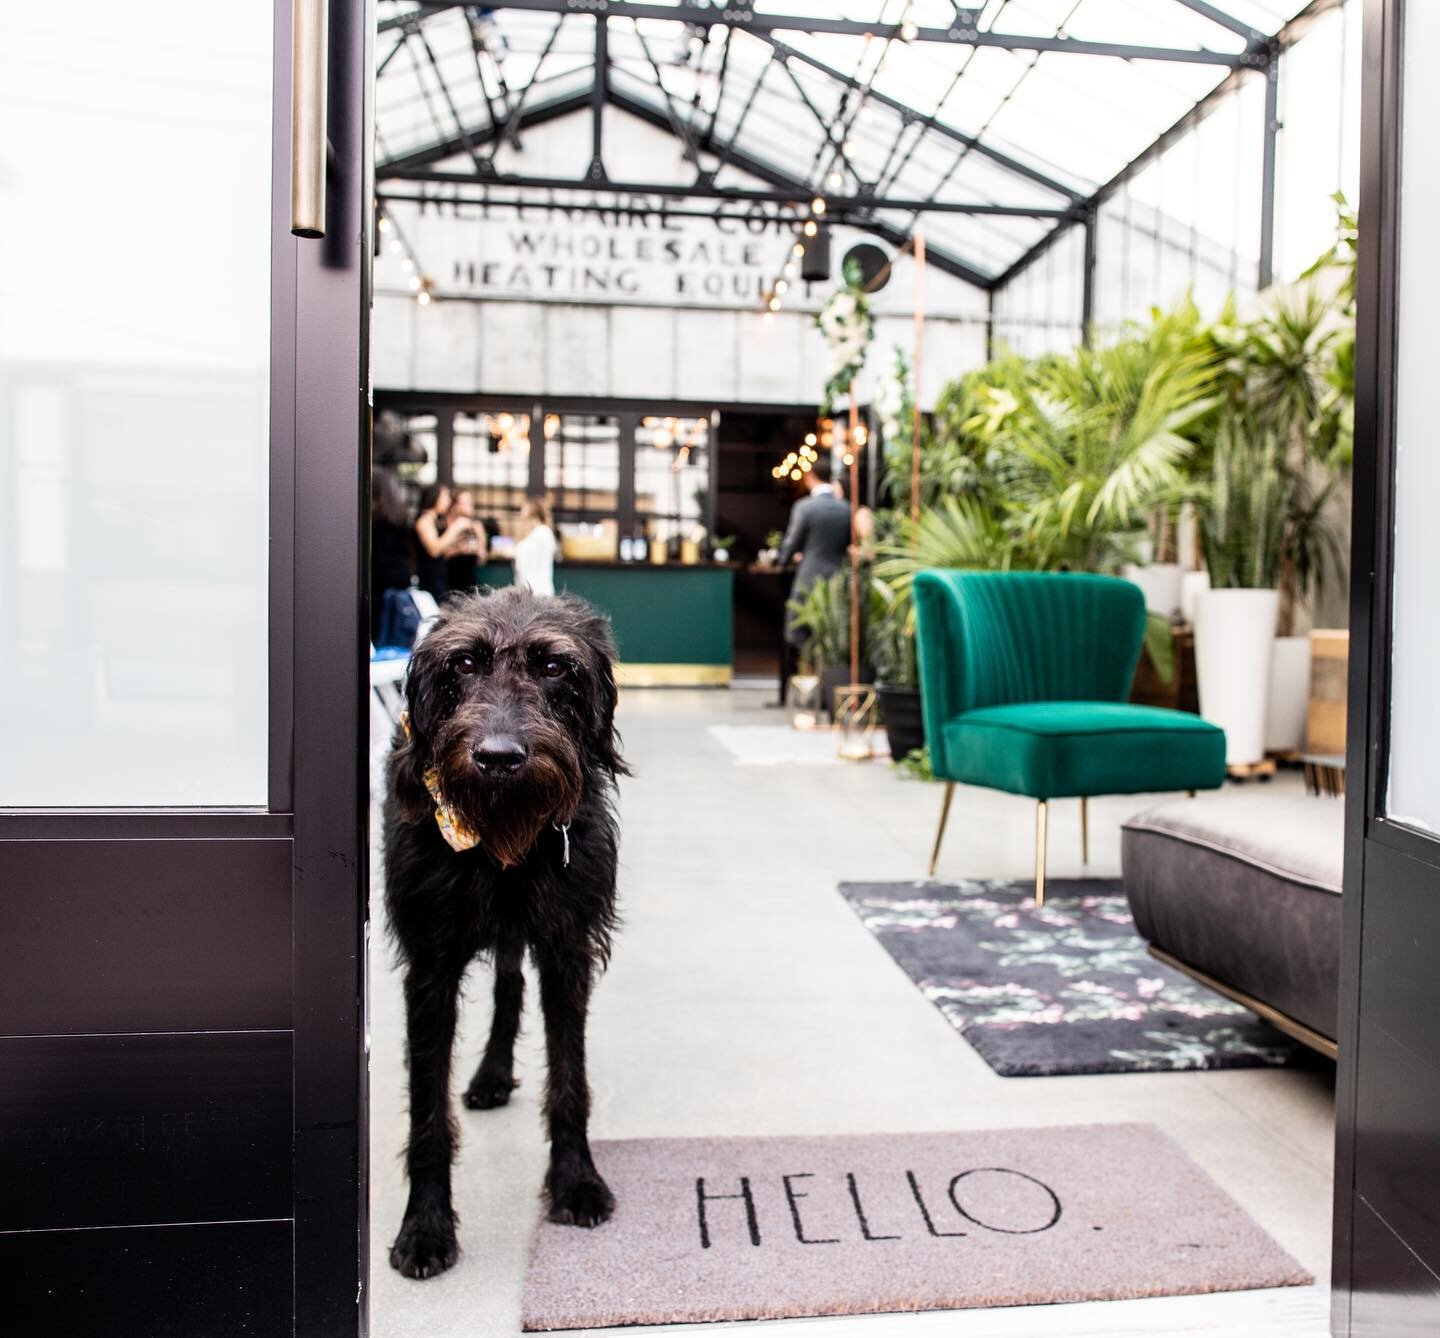 We love it when couples bring their pup with them to celebrate at The Tinsmith! This is Pickles, greeting guests as they arrive. 🥰🐶 📸: @maureenmcassidy